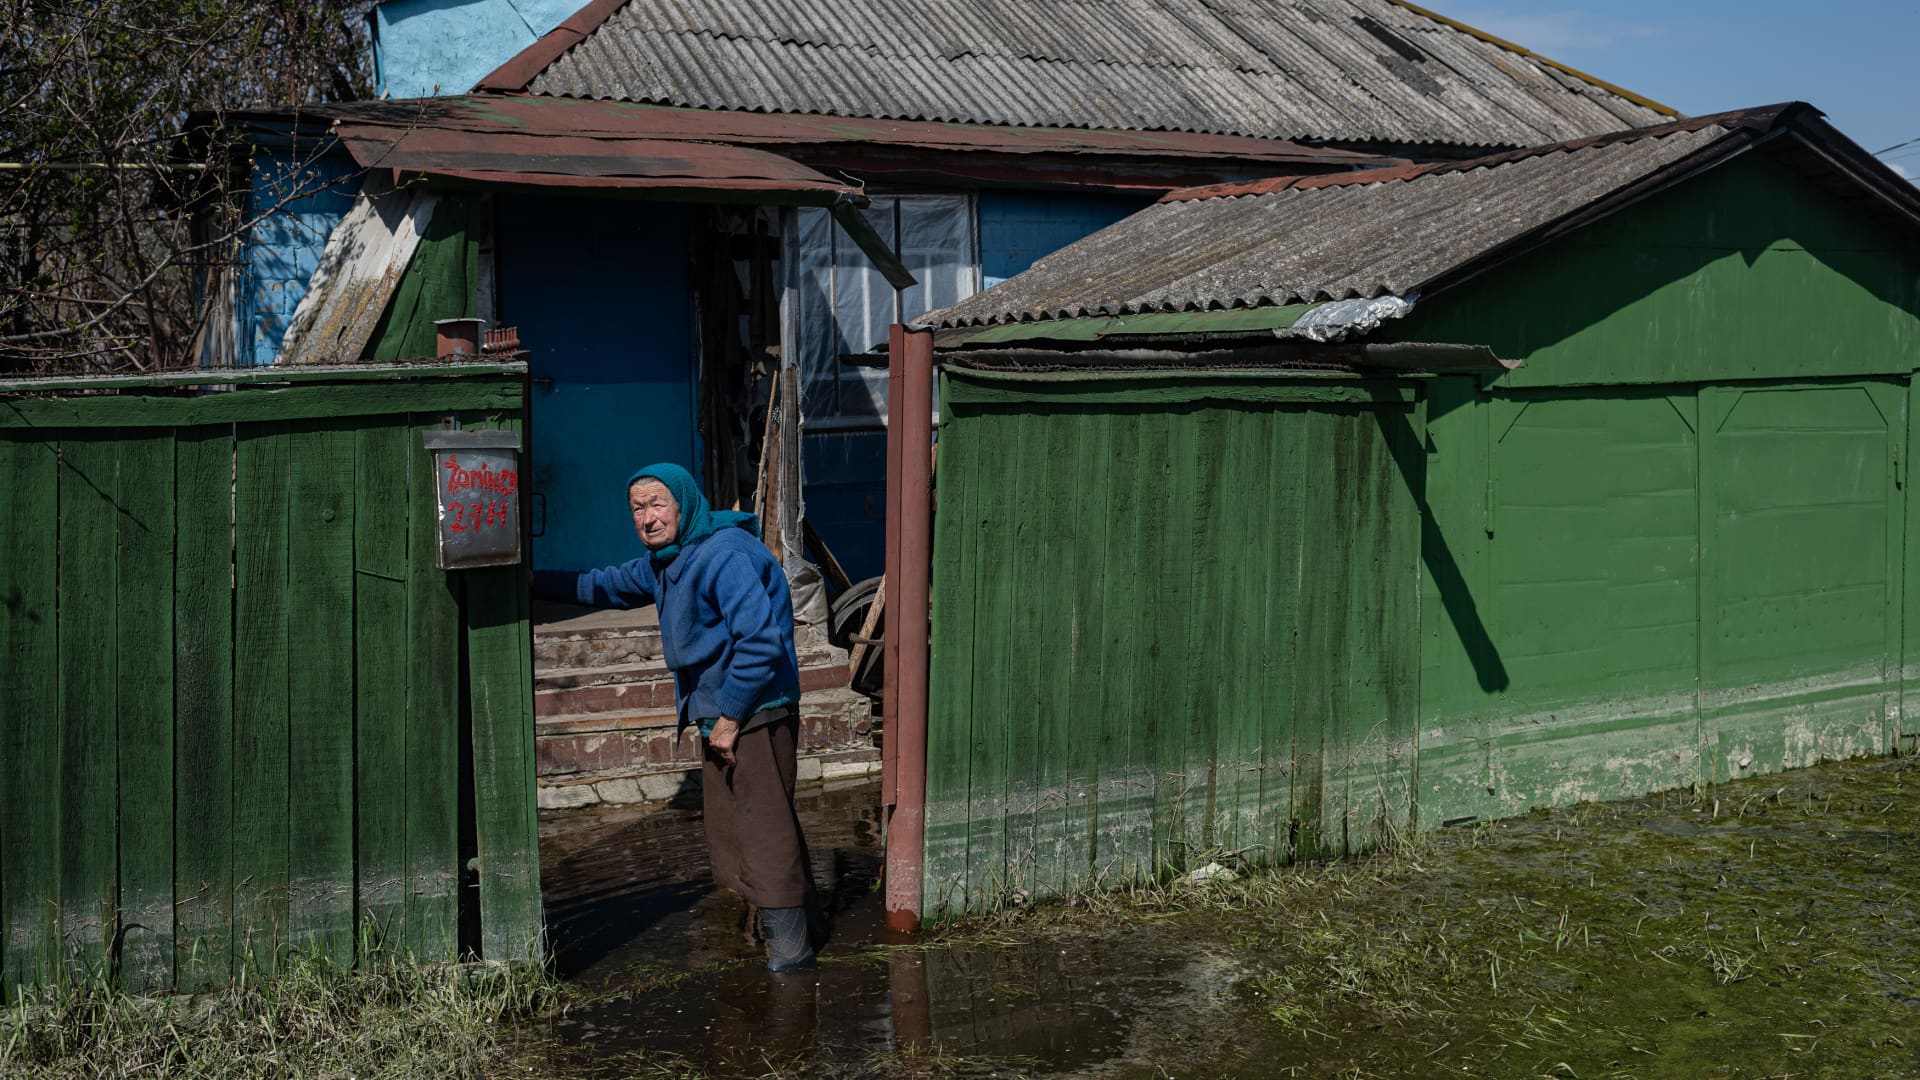 DEMYDIV, UKRAINE - MAY 02: Mariia, 82, stands on the entrance to her flooded household, on May 2, 2022 in Demydiv, Ukraine. To keep Russian armoured columns at bay, Ukrainian forces released water from a nearby hydroelectric dam to intentionally flood Demydiv, a village north of Kyiv. The decision was effective, but efforts to drain the area are complicated.(Photo by Alexey Furman/Getty Images)